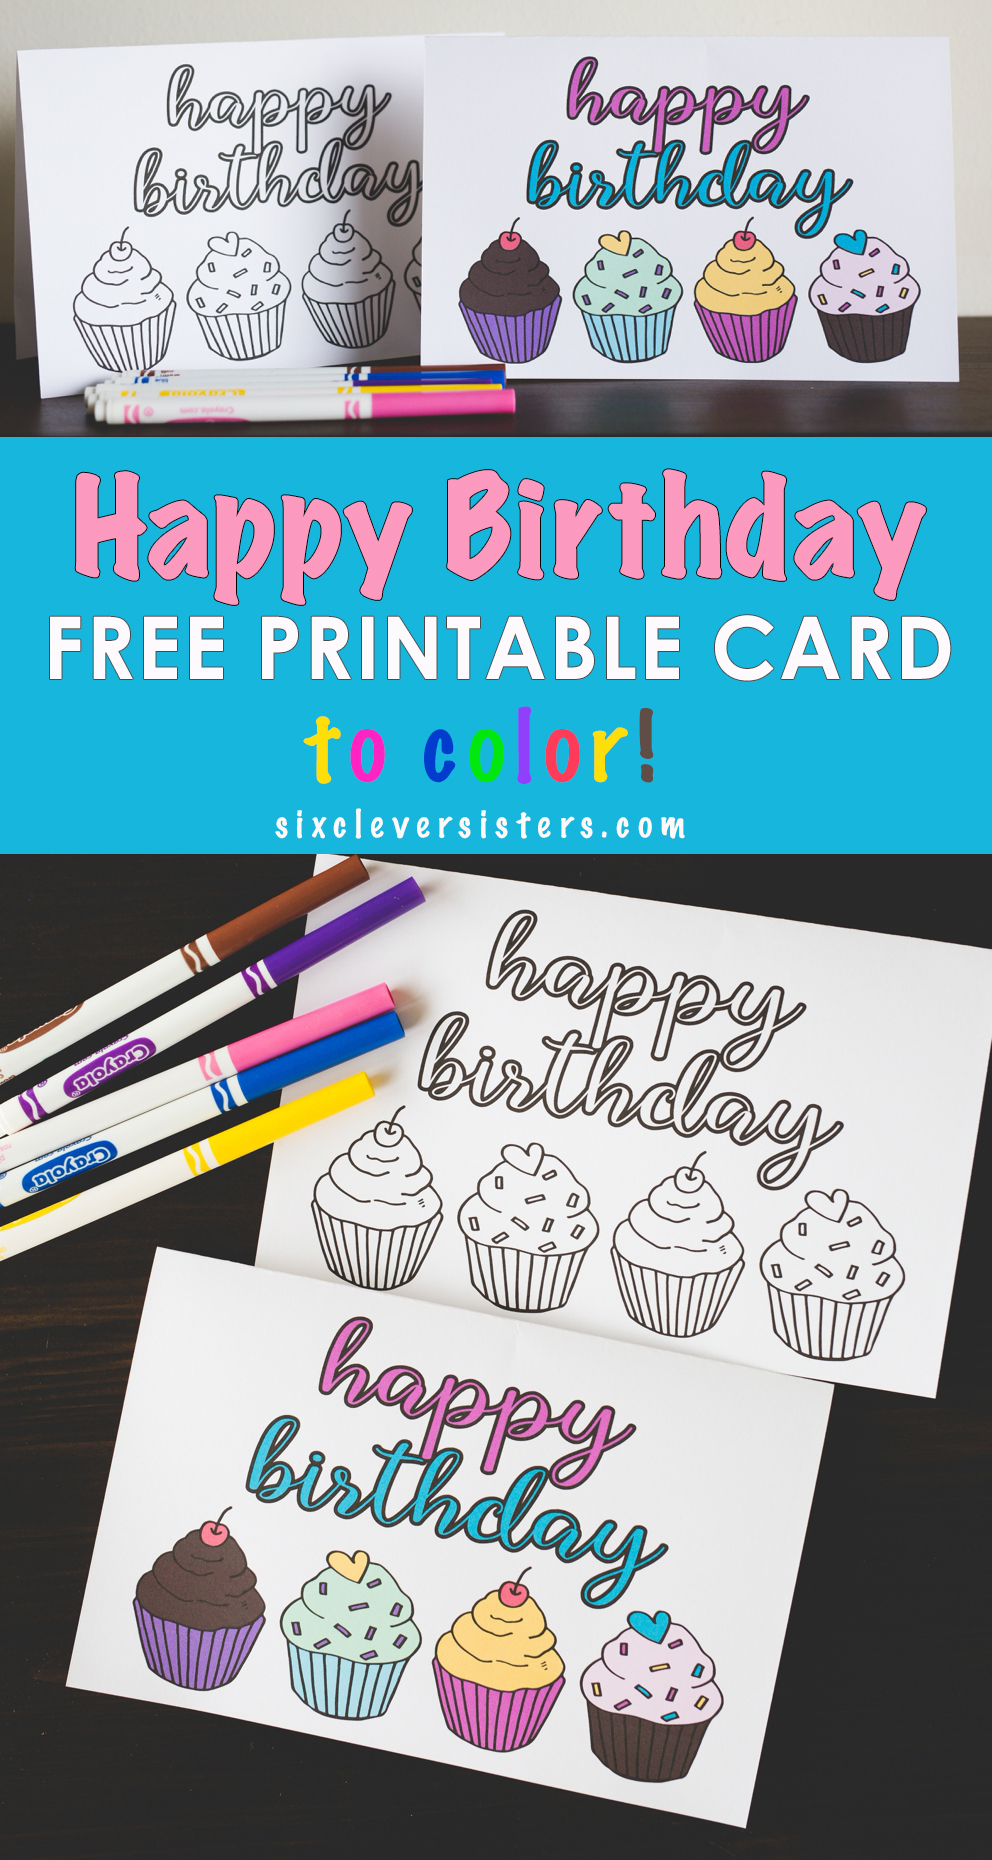 FREE Printable Happy Birthday Card - Six Clever Sisters